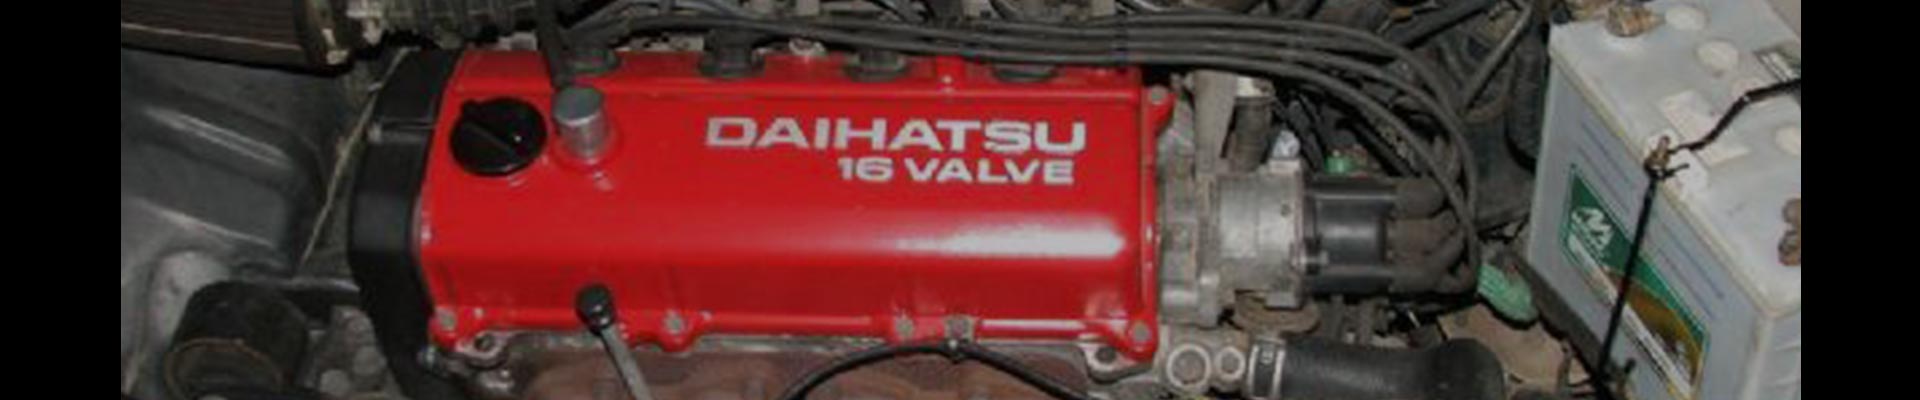 Shop Replacement 1990 Daihatsu Charade Parts with Discounted Price on the Net